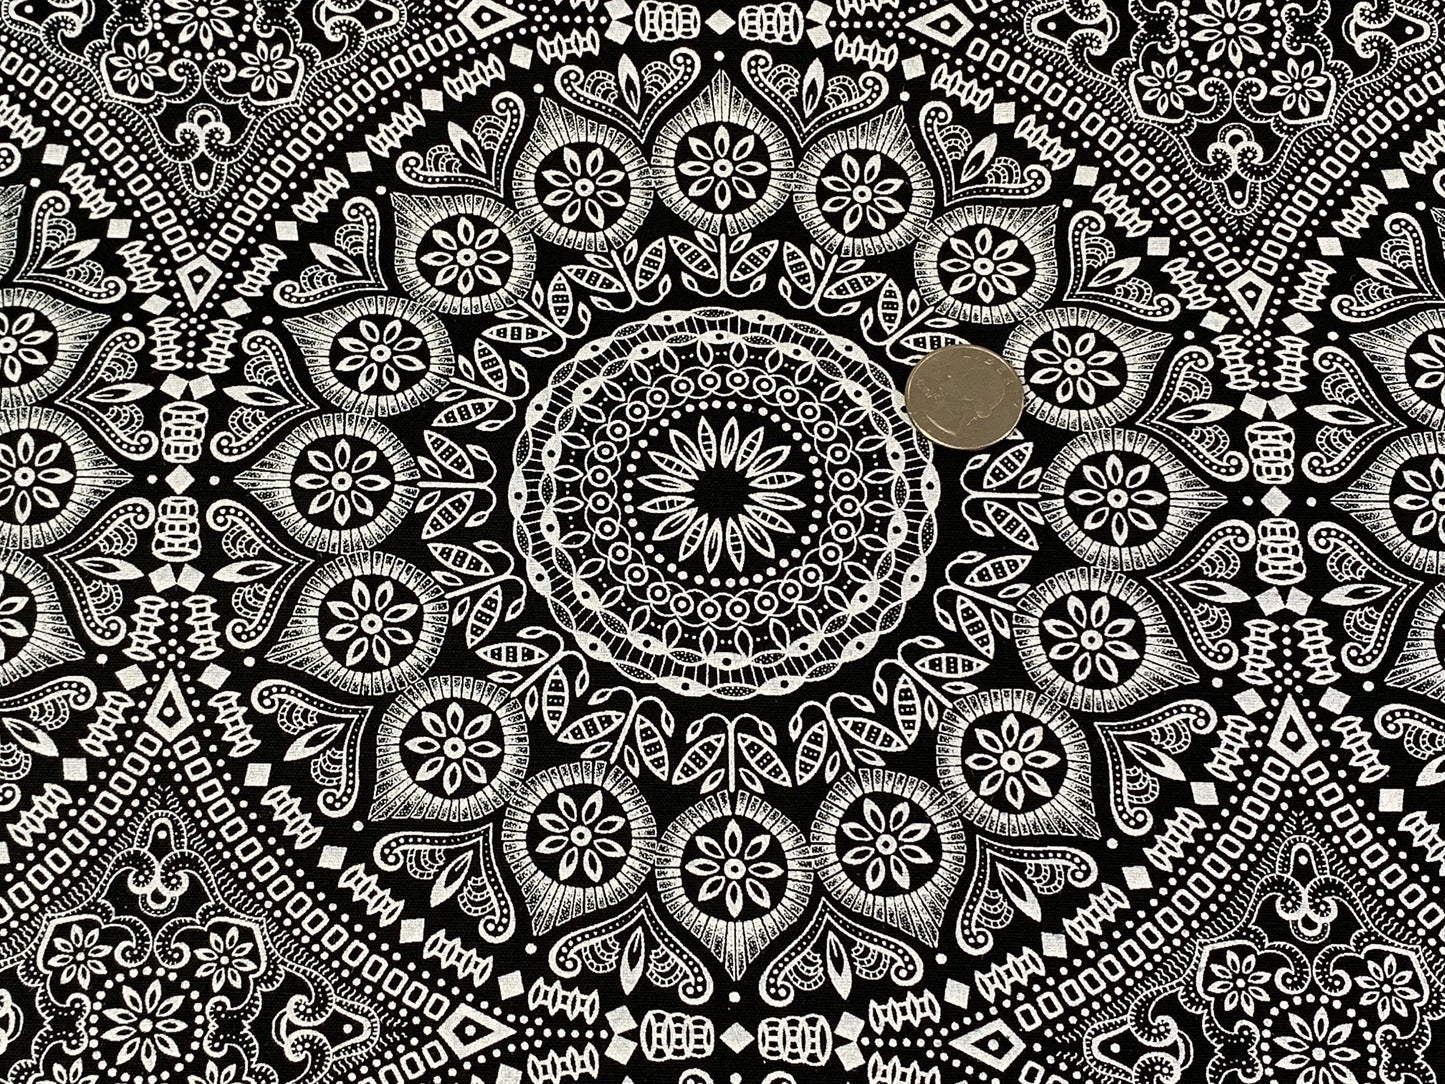 South African Shweshwe Fabric by the YARD. DaGama 3 Cats Black & White Giant Mandalas. 100% Cotton Fabric for Quilts, Apparel, Home Decor